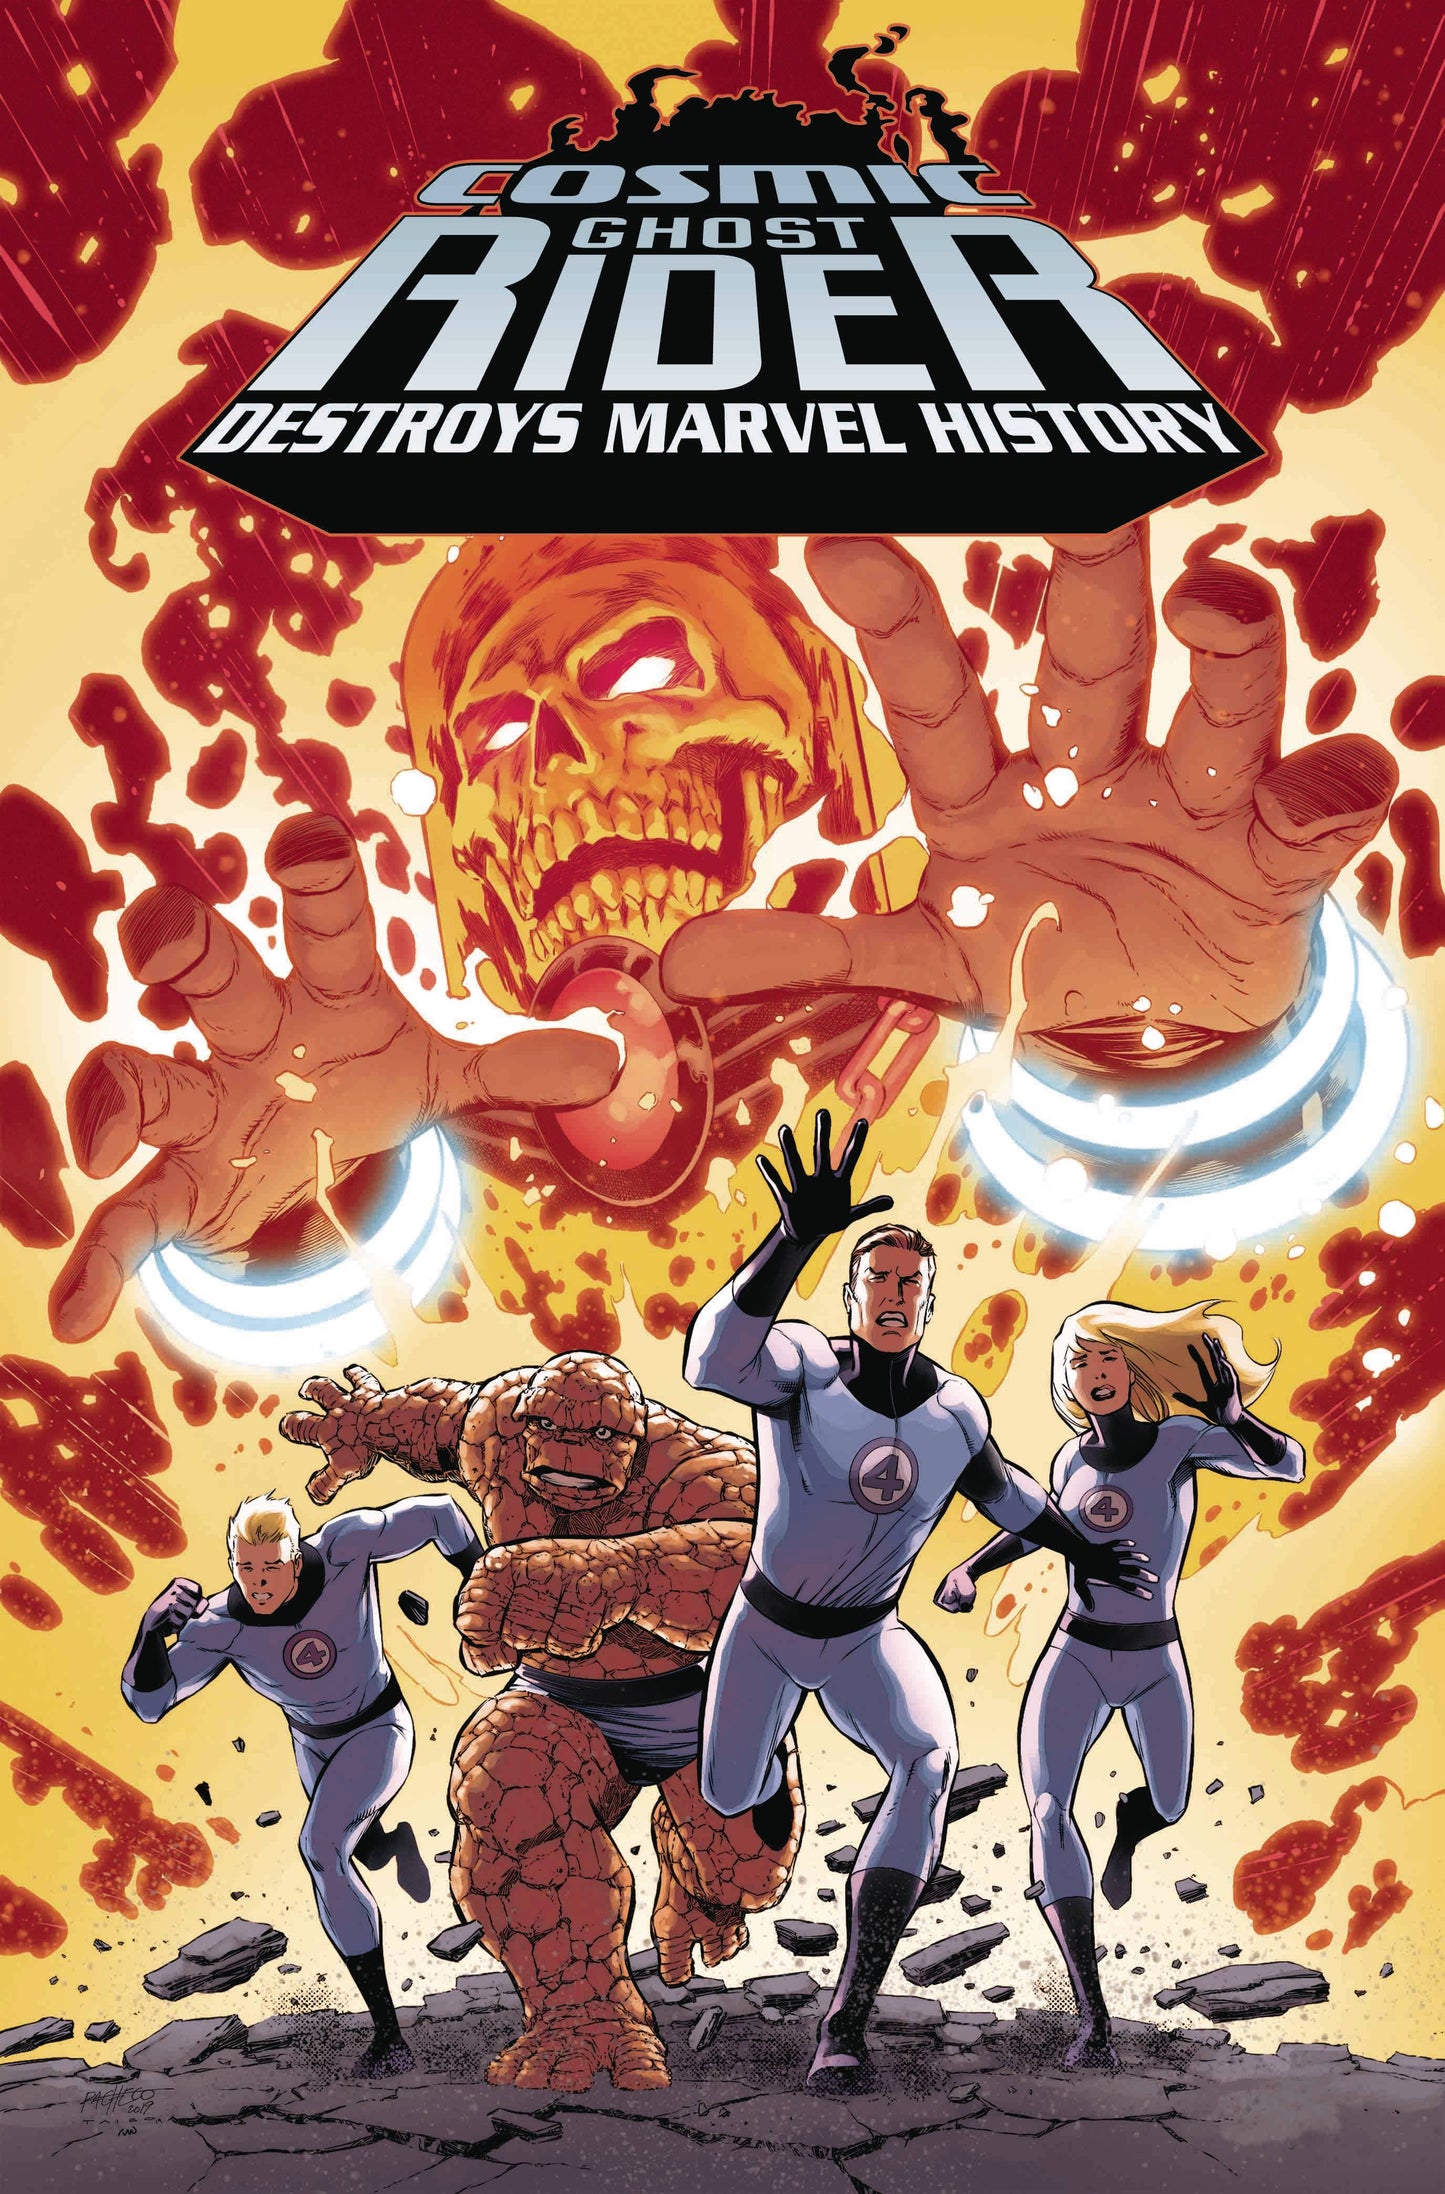 COSMIC GHOST RIDER DESTROYS MARVEL HISTORY #1 (OF 6) 1:10 Carlos Pacheco Variant (03/06/2019) MARVEL